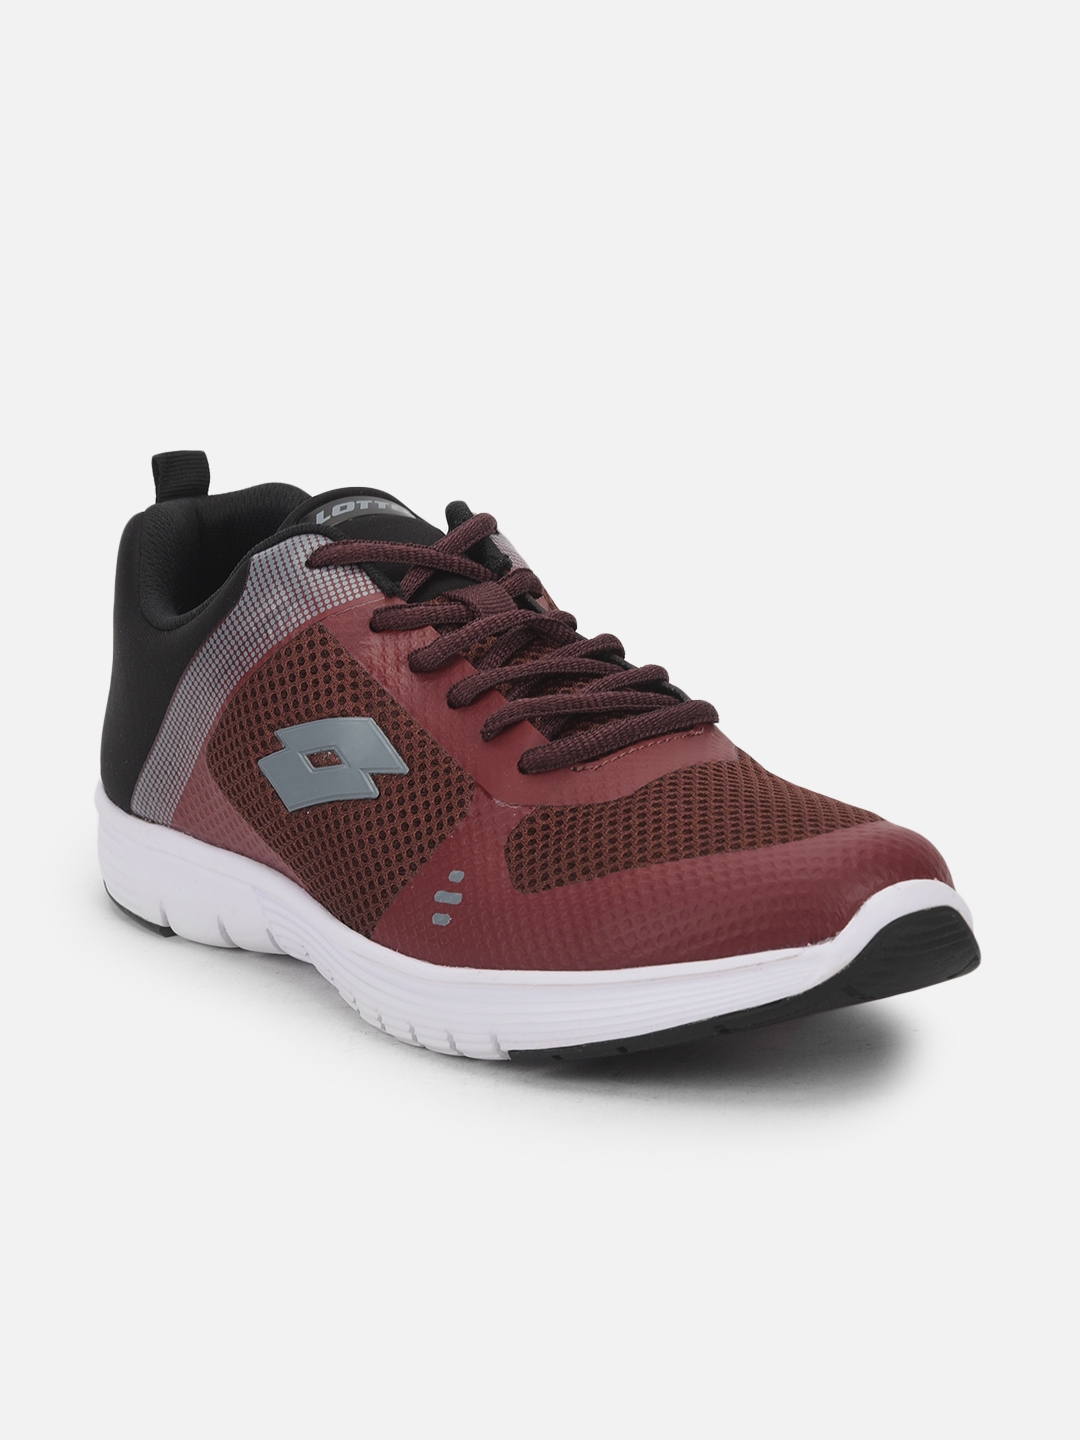 Lotto | LOTTO MEN DAWDLE 2.0 RUNNING SHOES